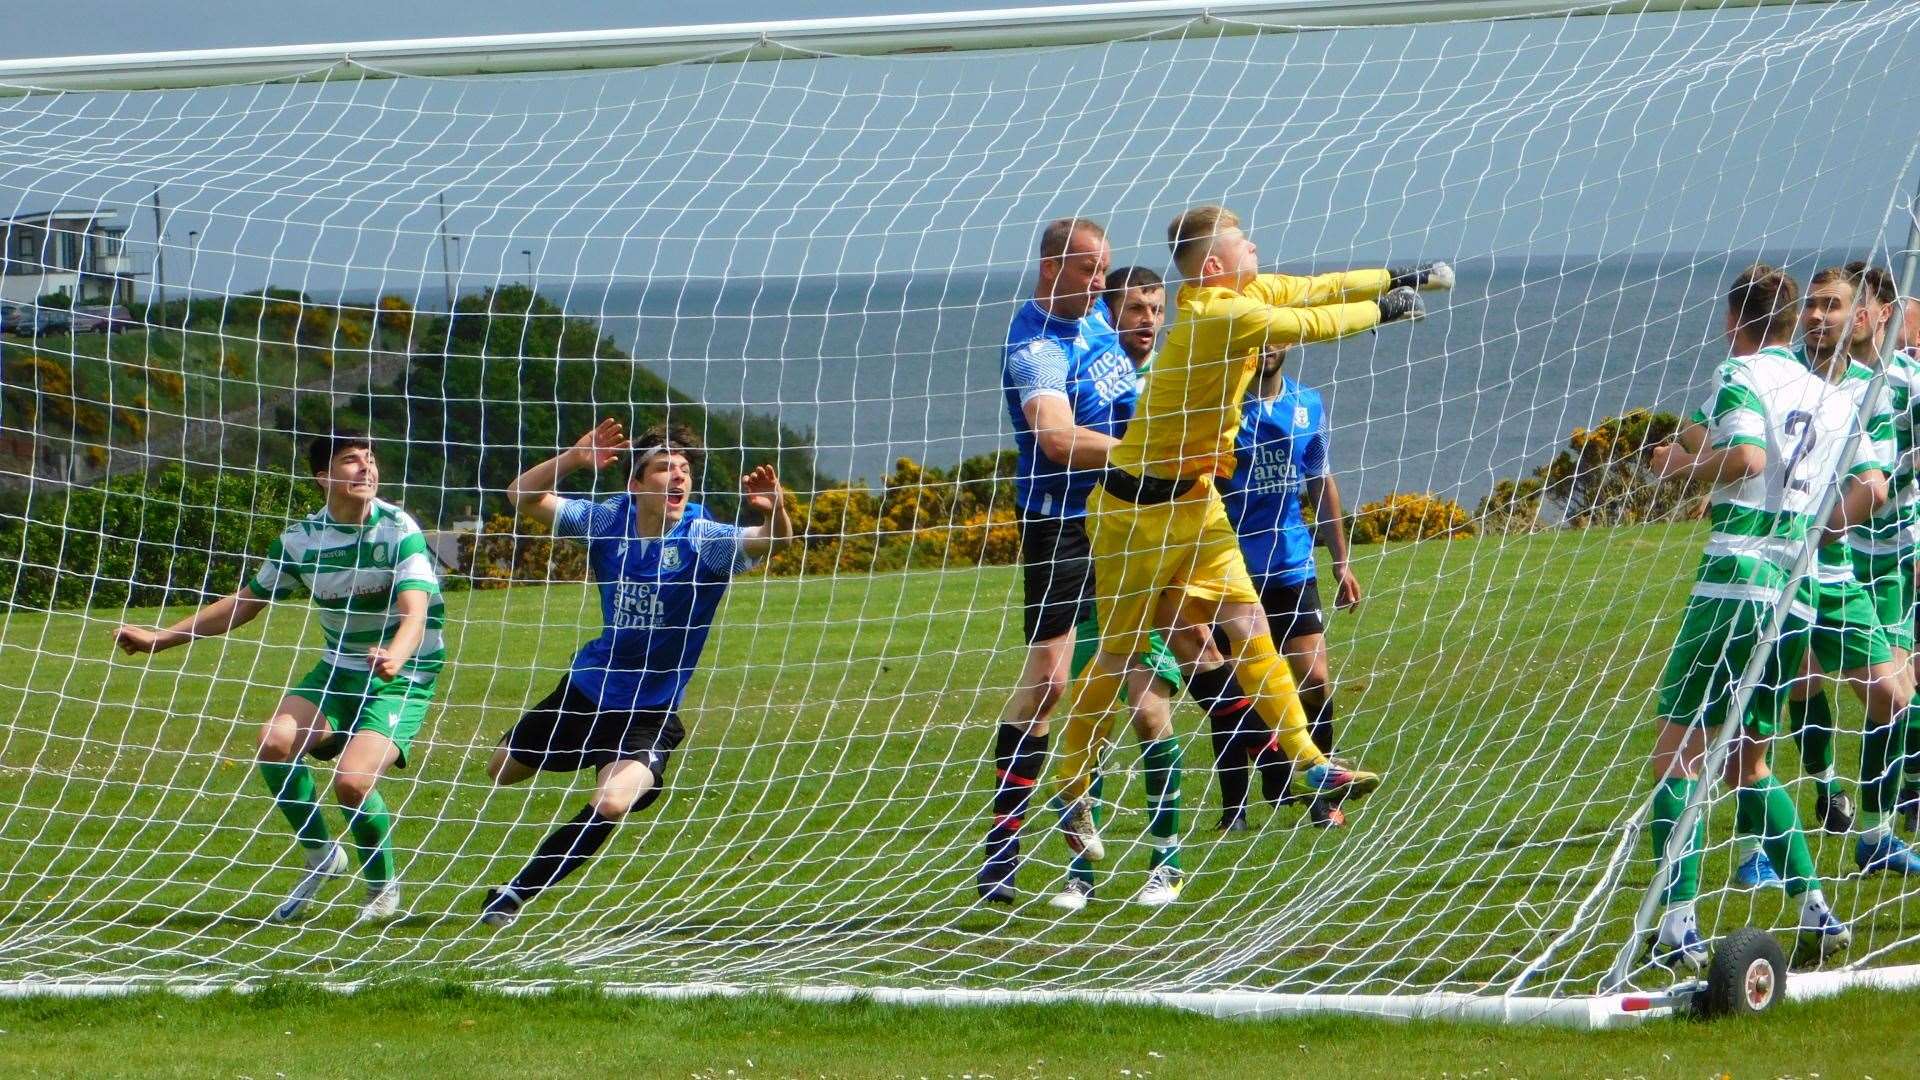 Helmsdale United moved to the top of the table after their five goal thrashing of Lochbroom. Photo: Justine Holmes